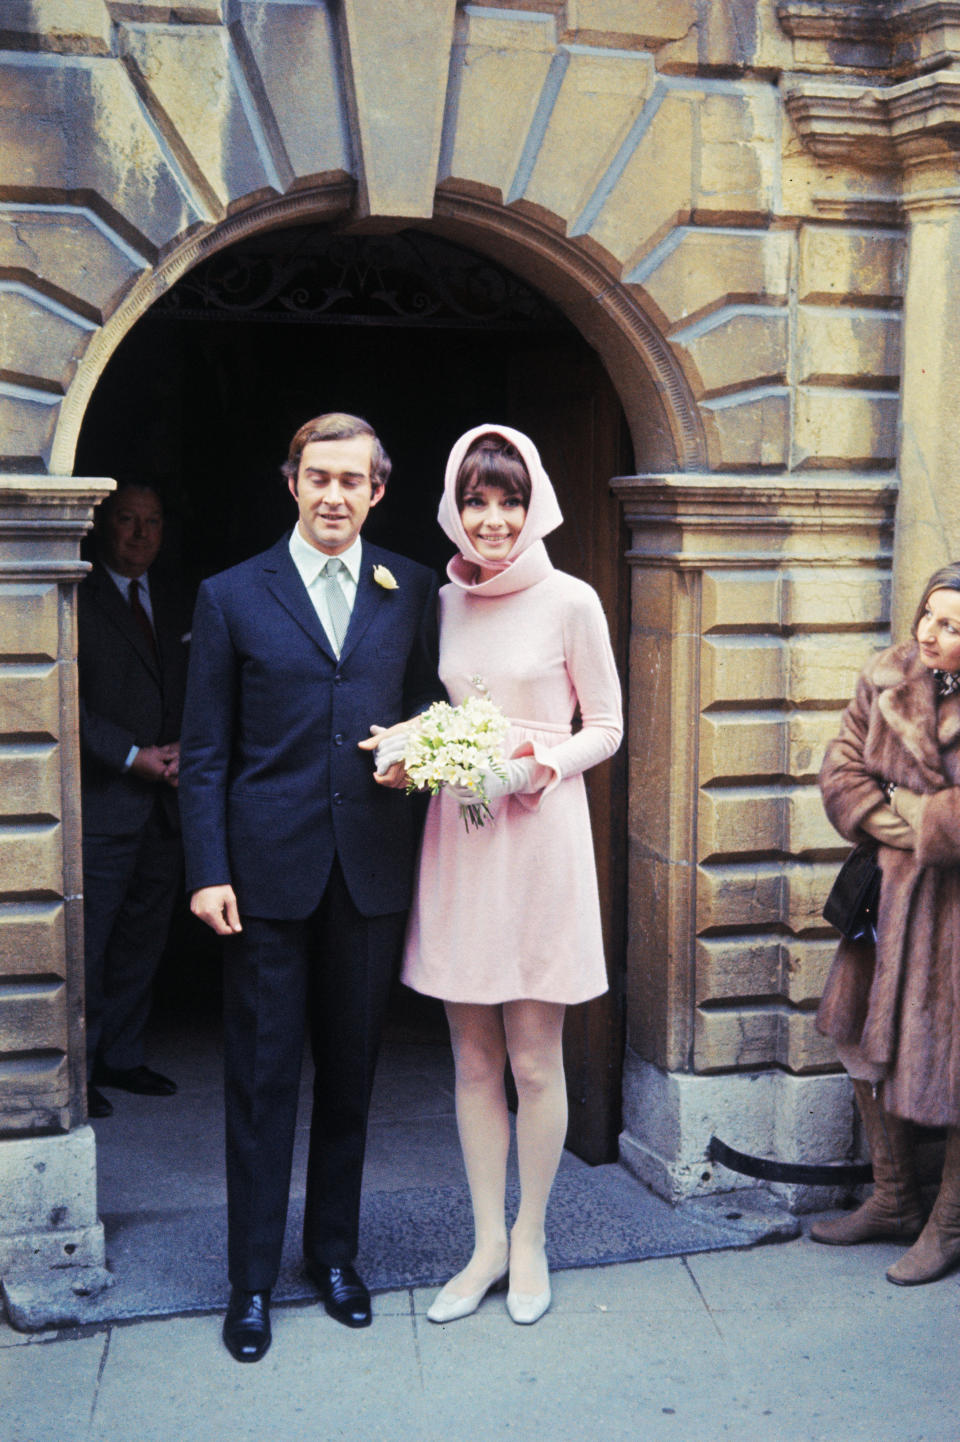 Audrey Hepburn and Dr. Andrea Dotti after their wedding in 1969. [Photo: Getty]